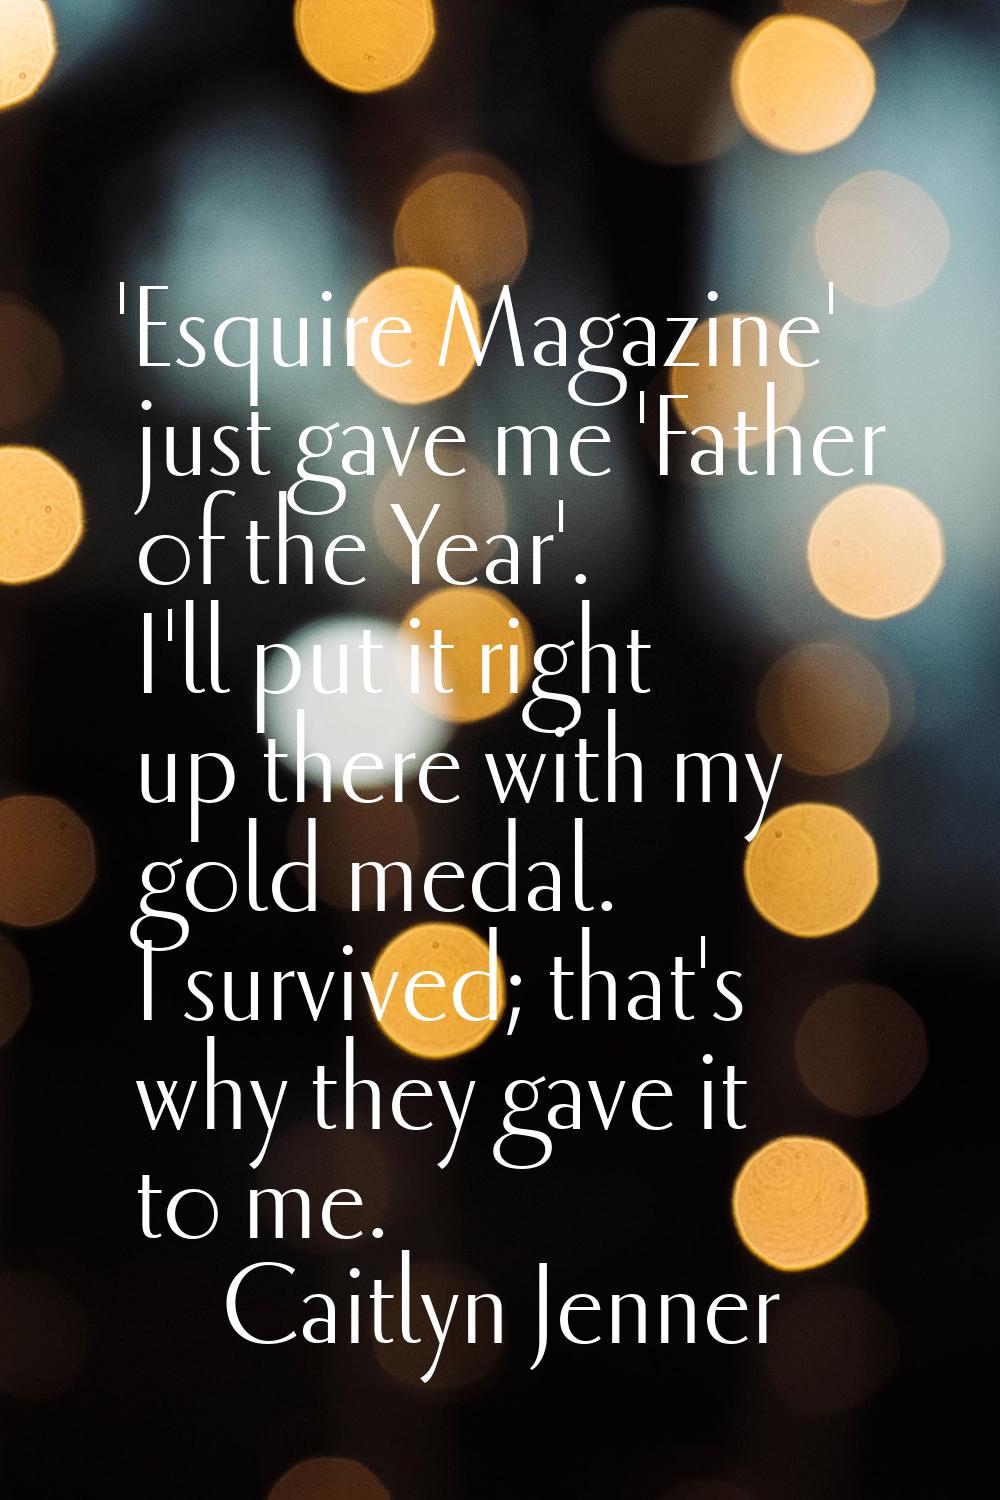 'Esquire Magazine' just gave me 'Father of the Year'. I'll put it right up there with my gold medal